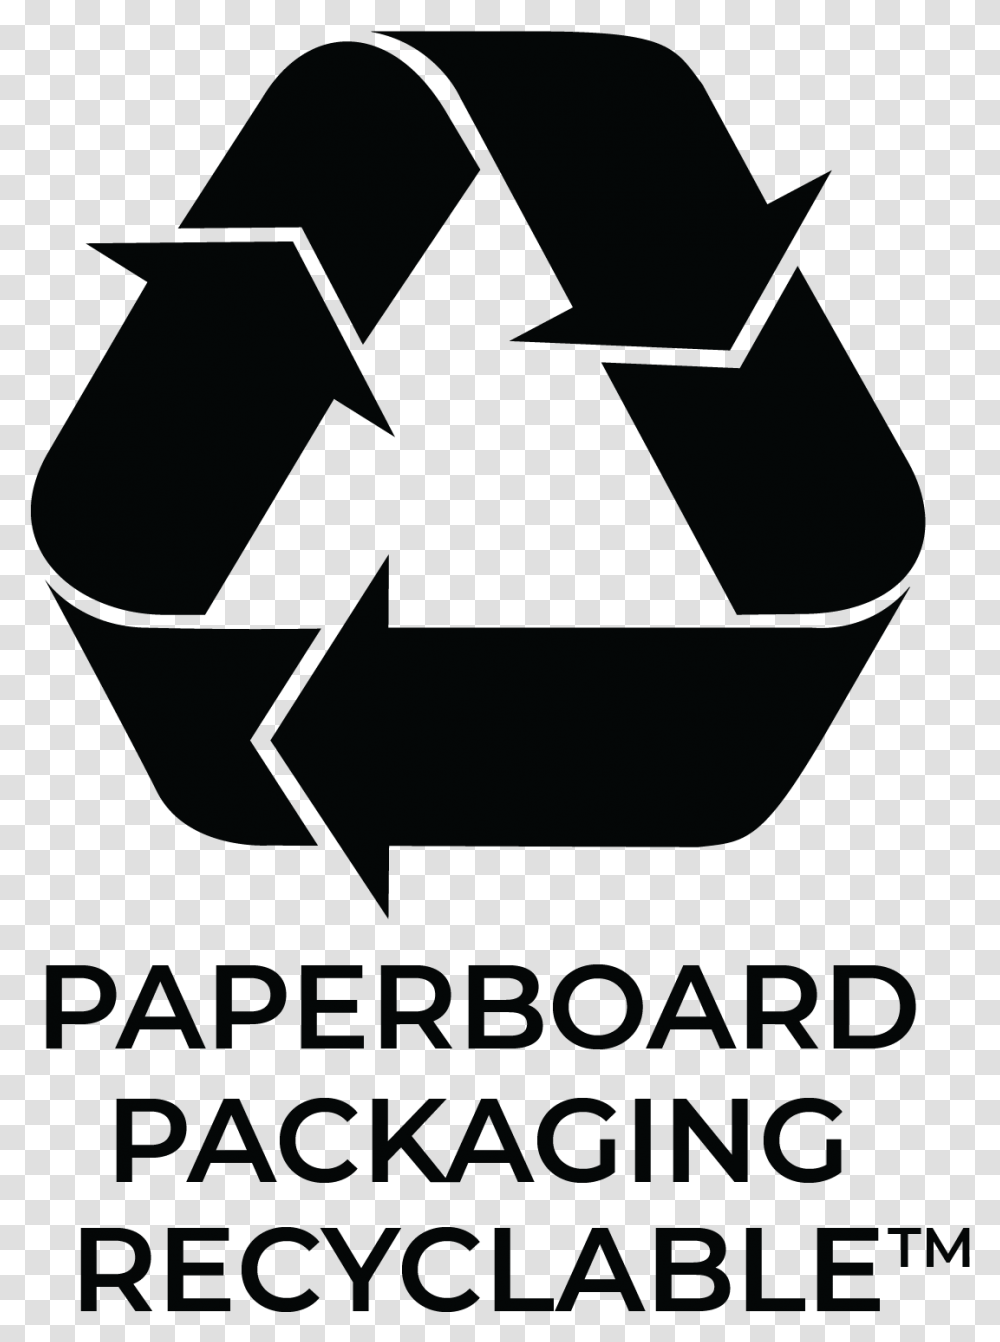 Made From Recycled Materials Logo, Recycling Symbol, Poster, Advertisement Transparent Png